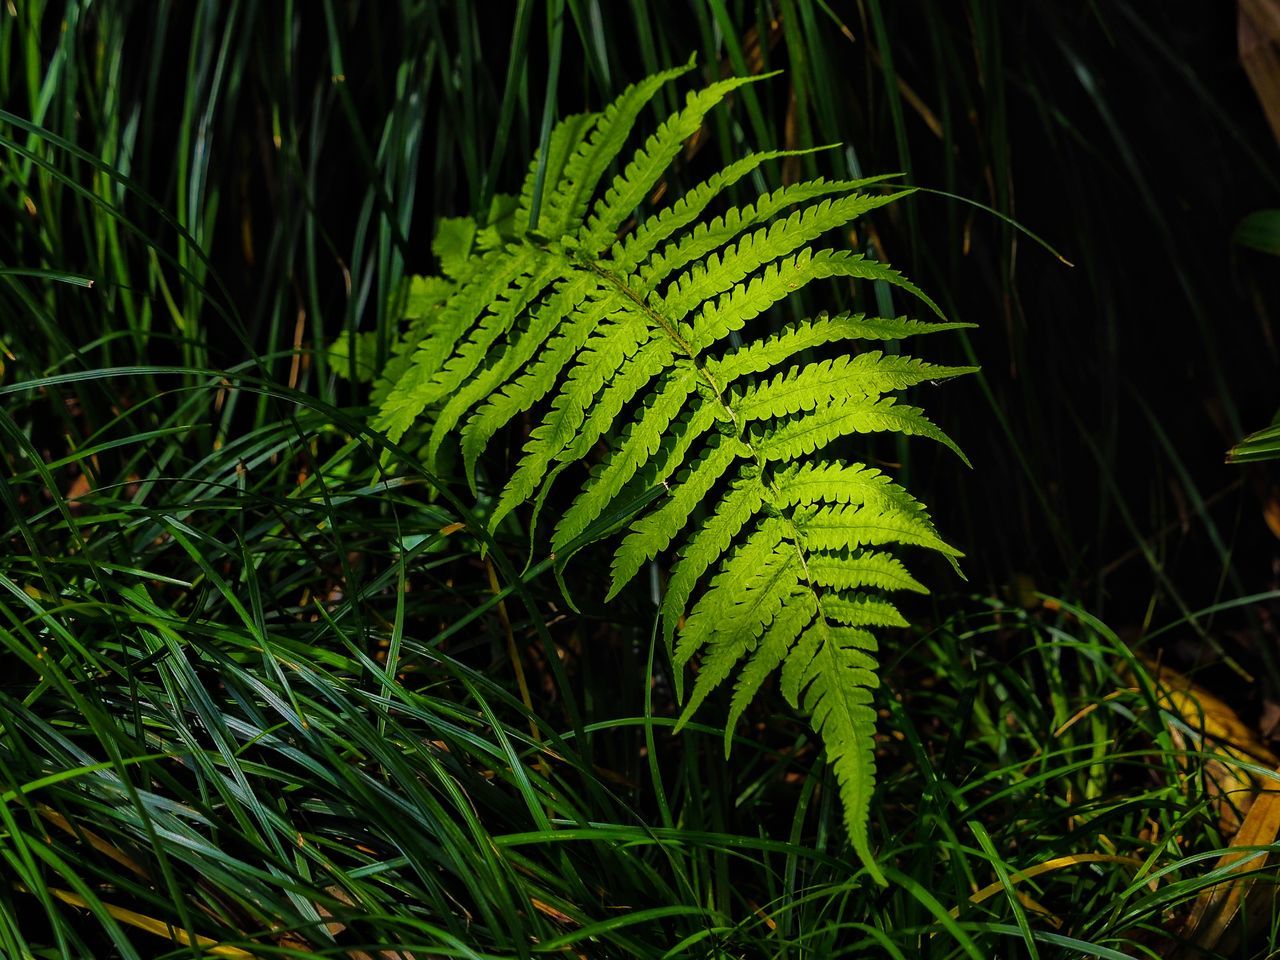 CLOSE-UP OF FERN ON FIELD